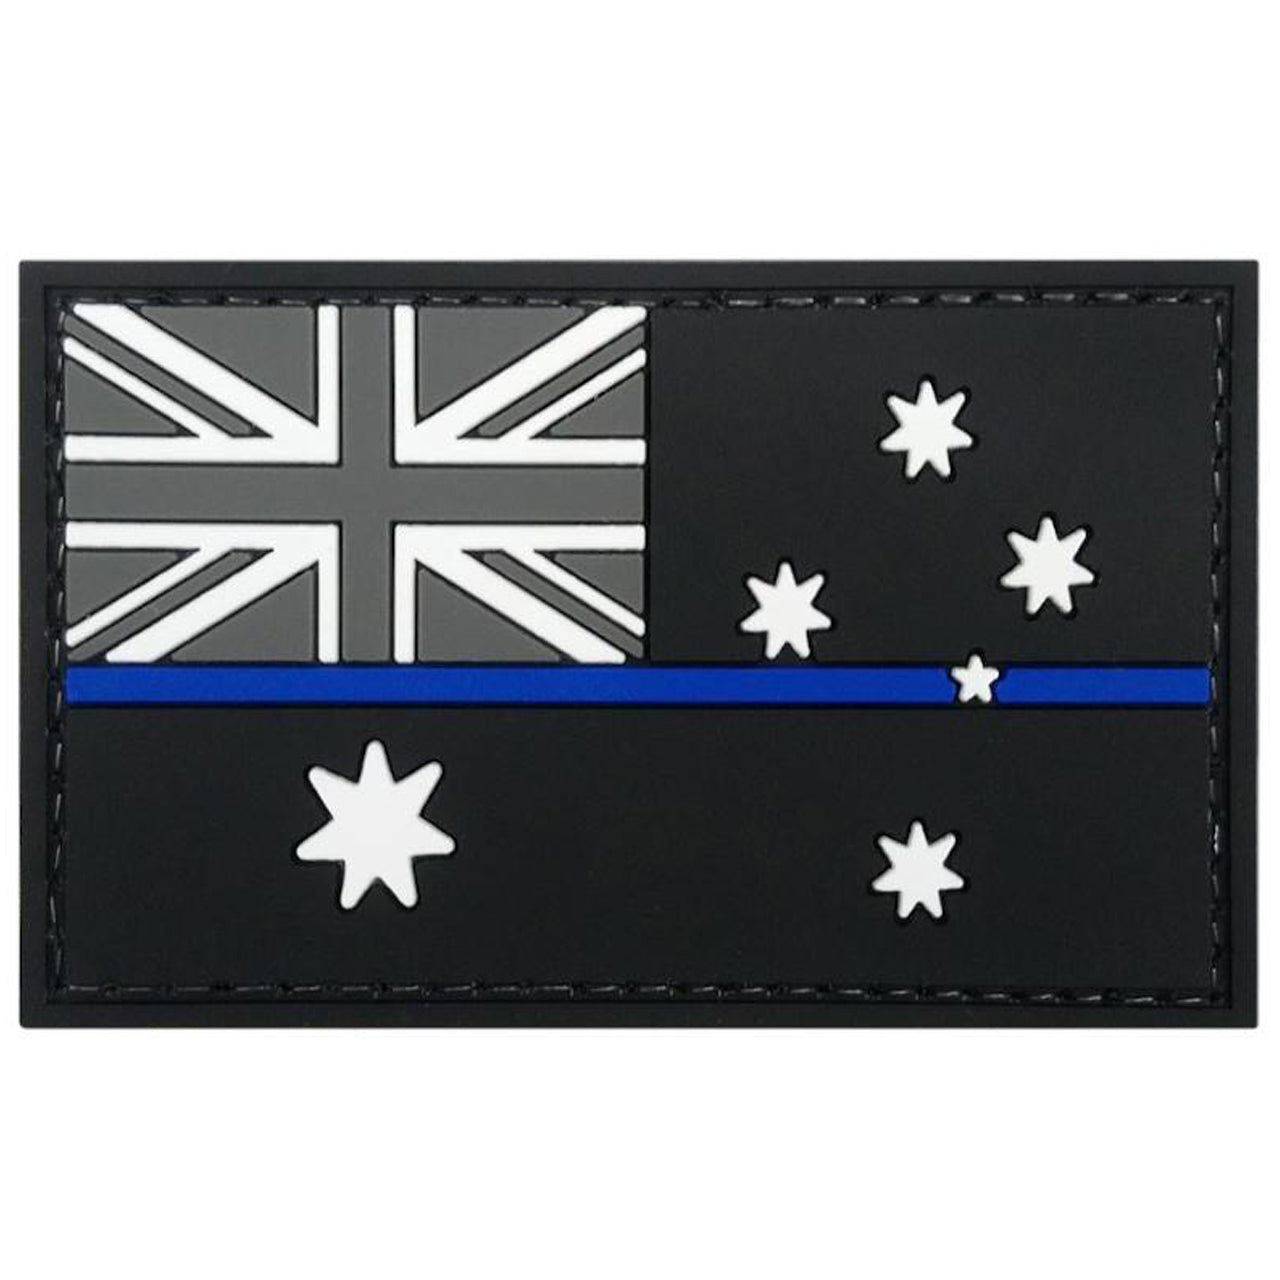 Australian Flag PVC Patch with Thin Blue Line  Great for attaching to your field gear, jackets, hats or even create your own patch board.  Size: 8x5cm  VELCRO BACKED